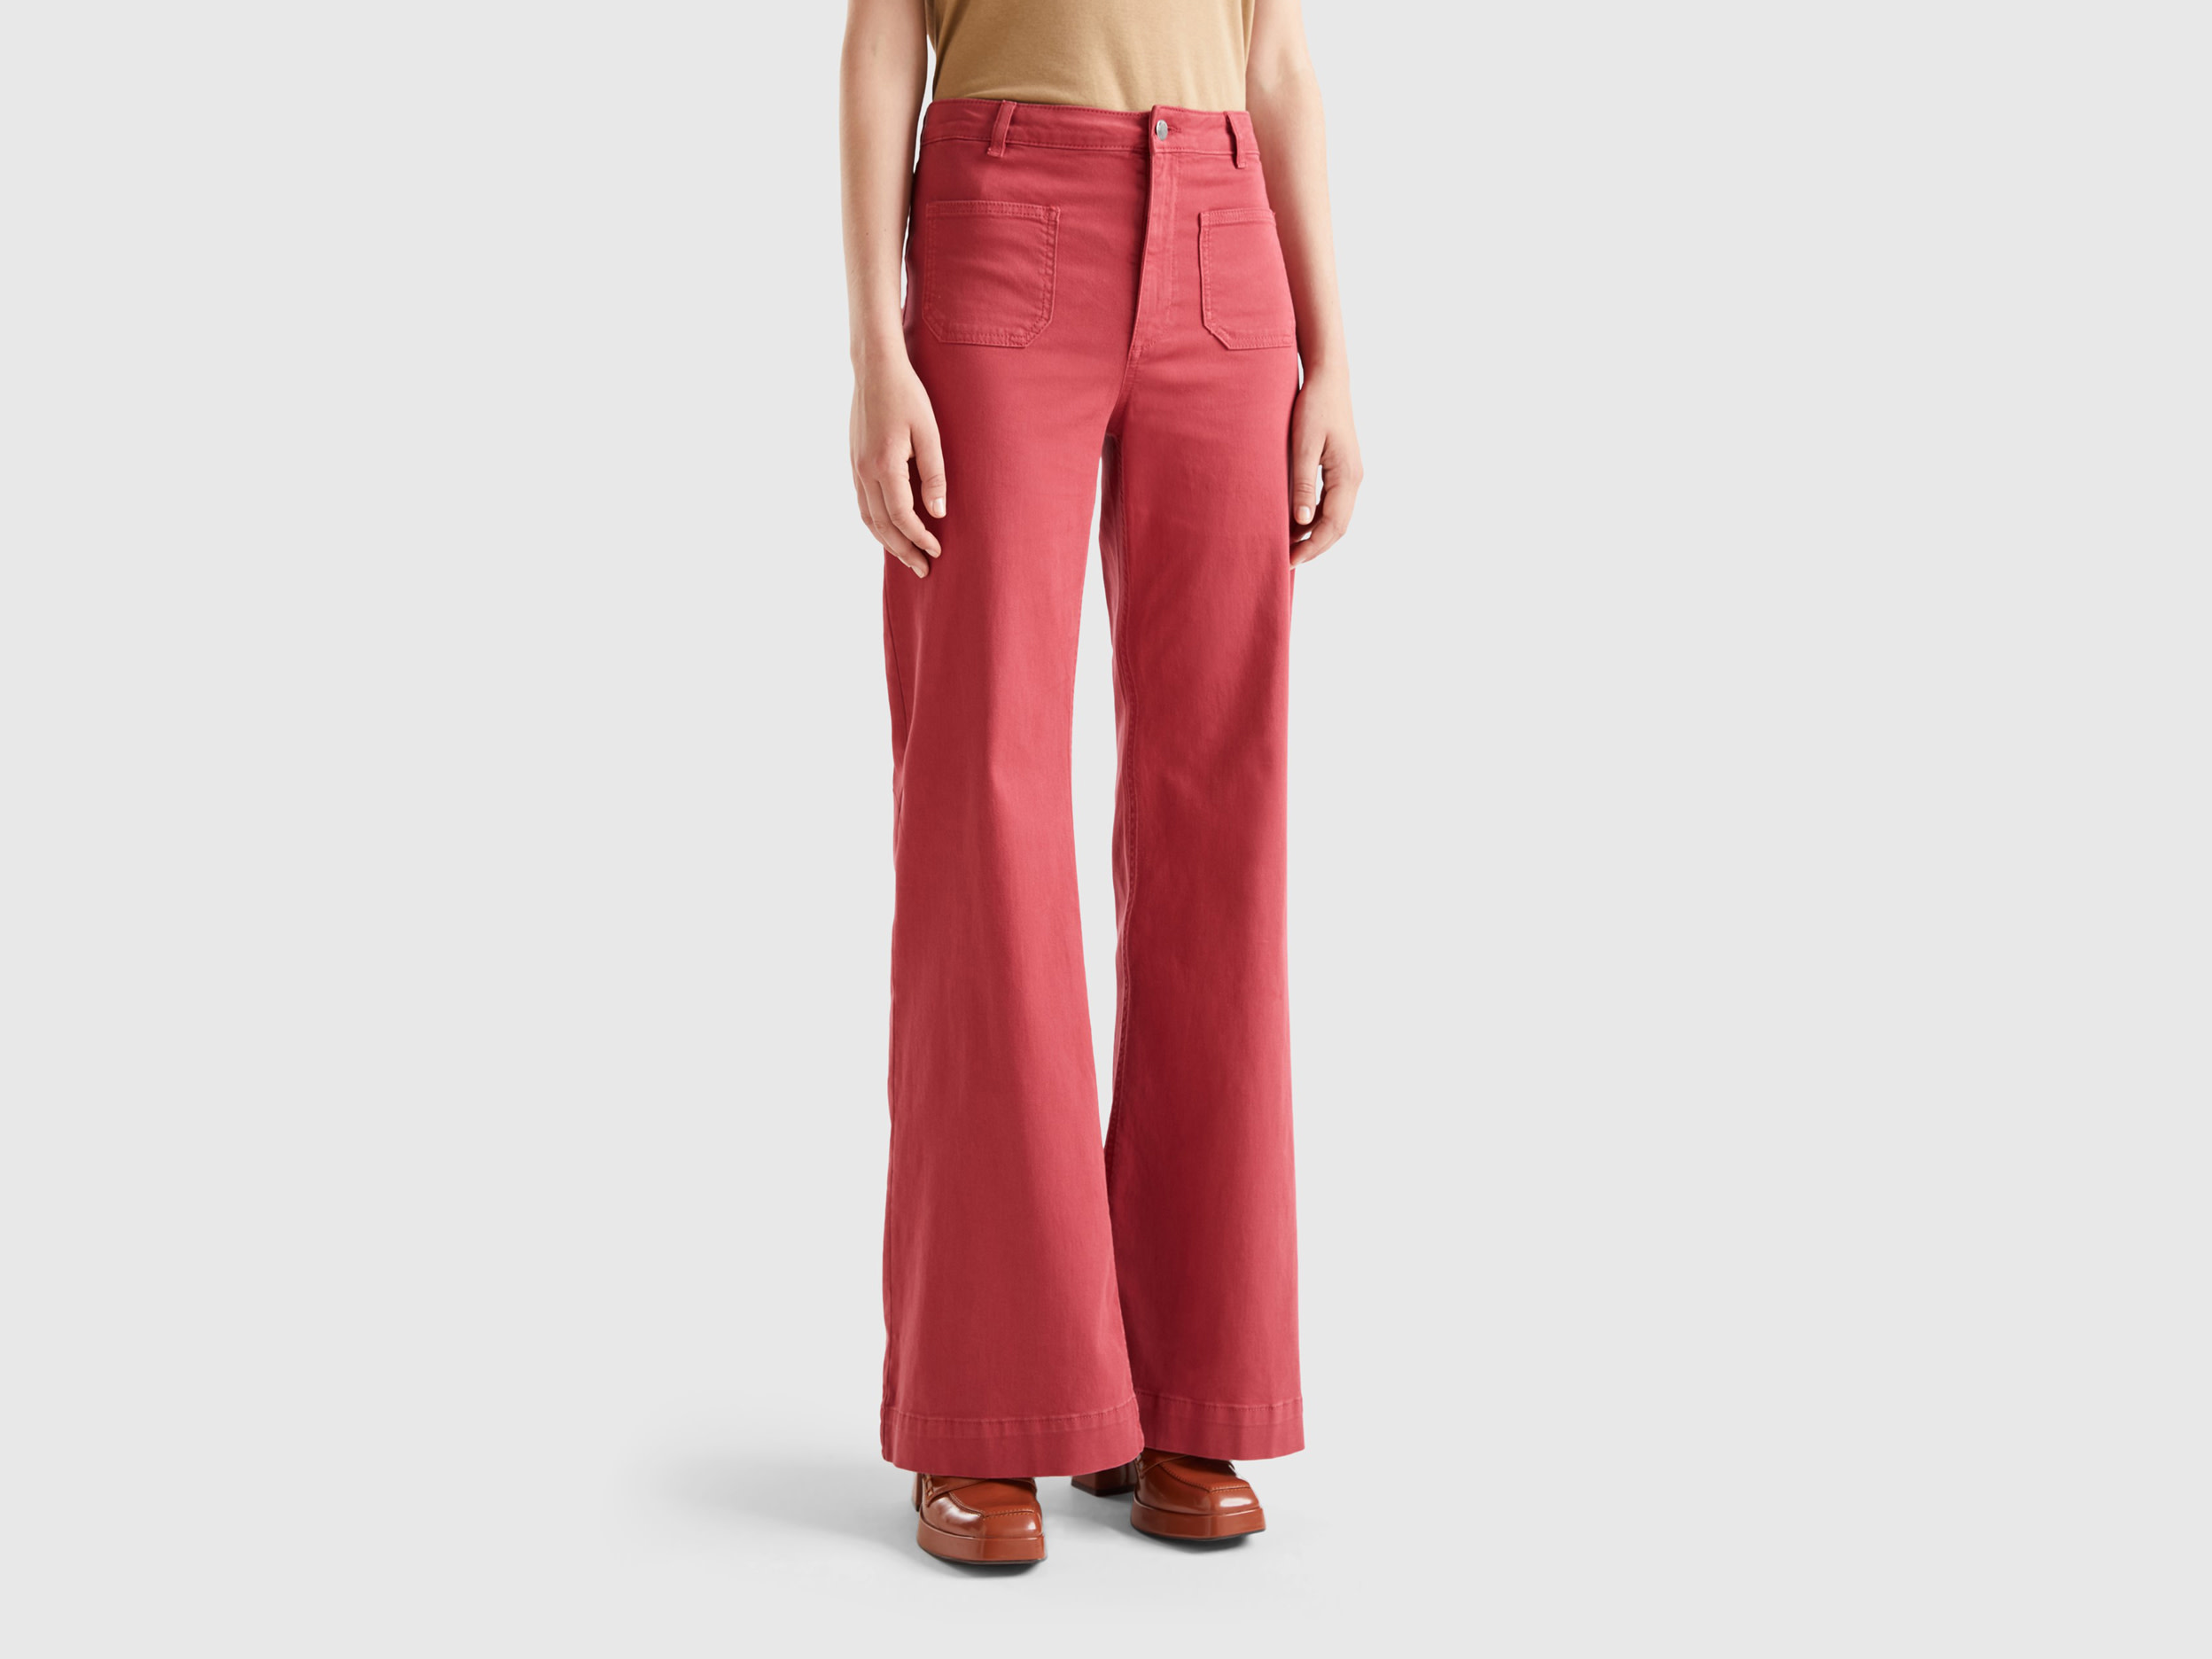 Benetton, Flared Pants, size 10, Red, Women